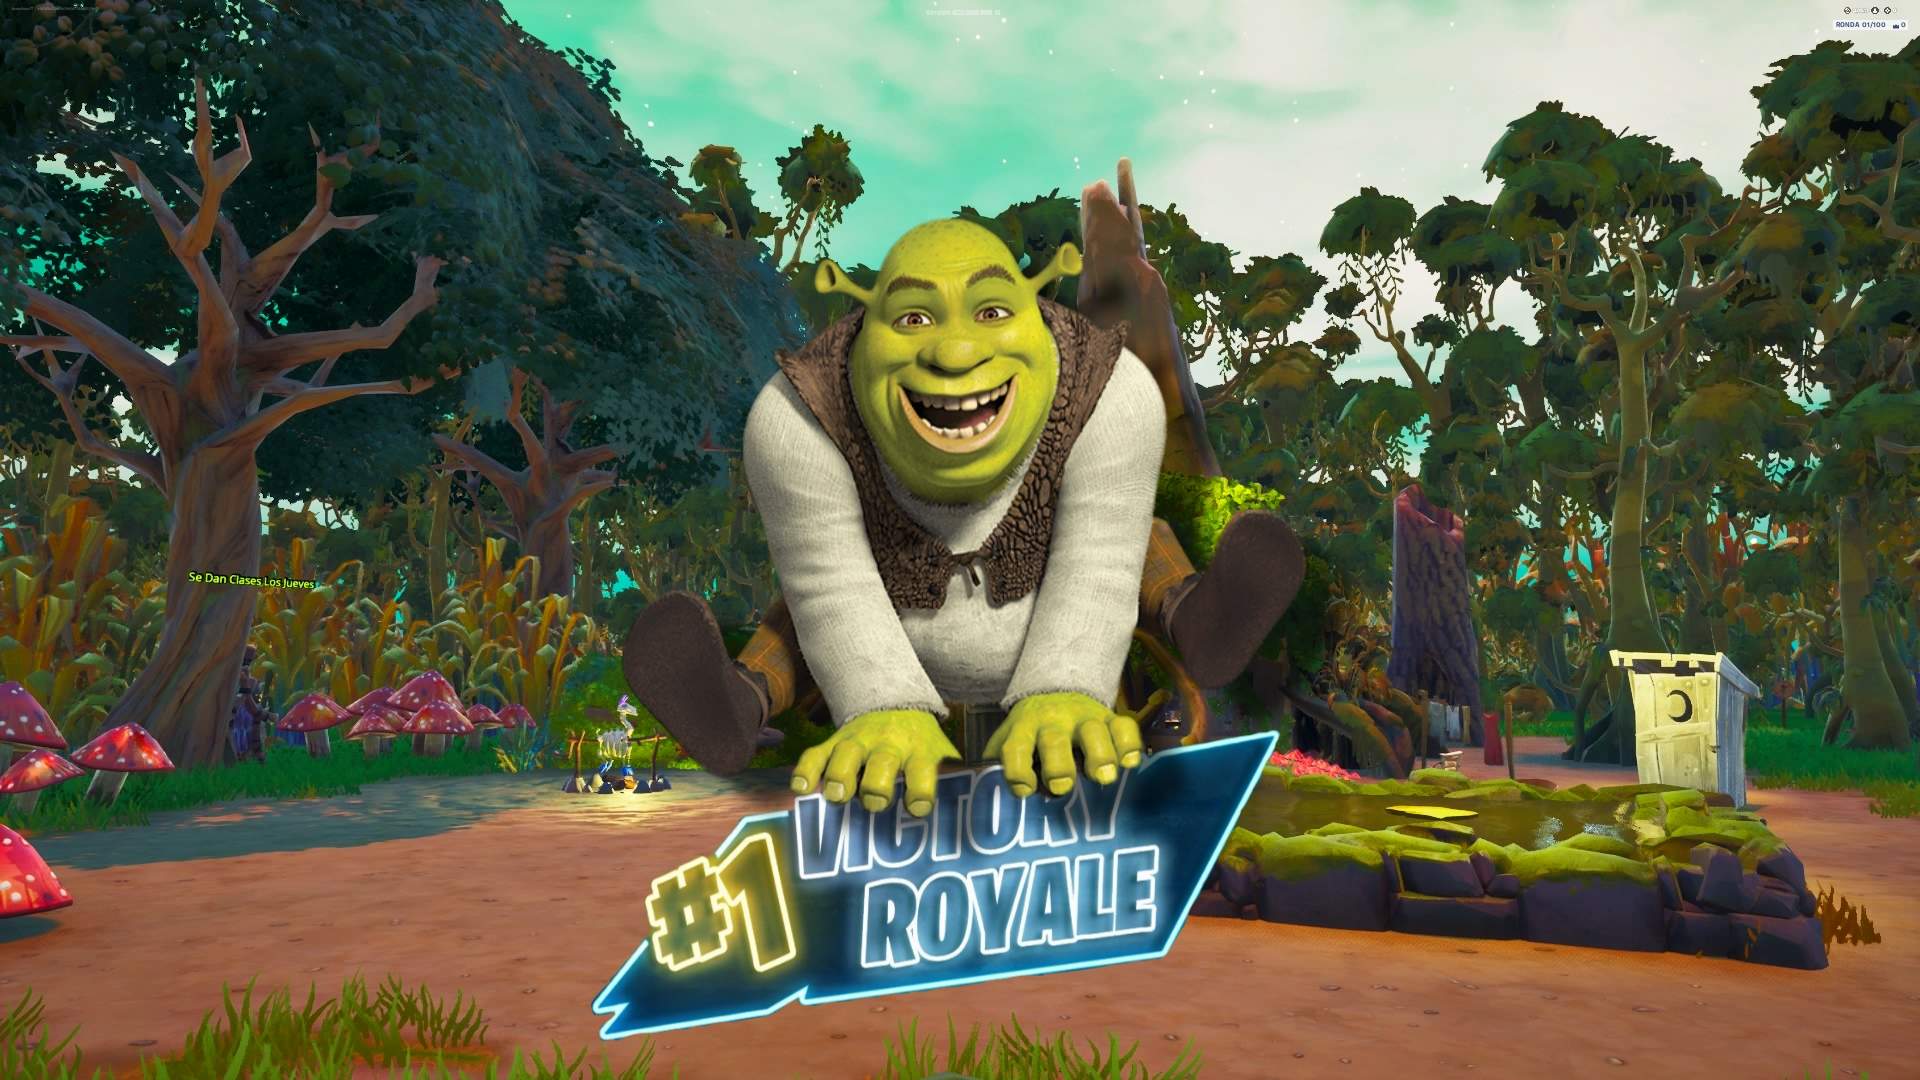 What are you doing in my swamp?!